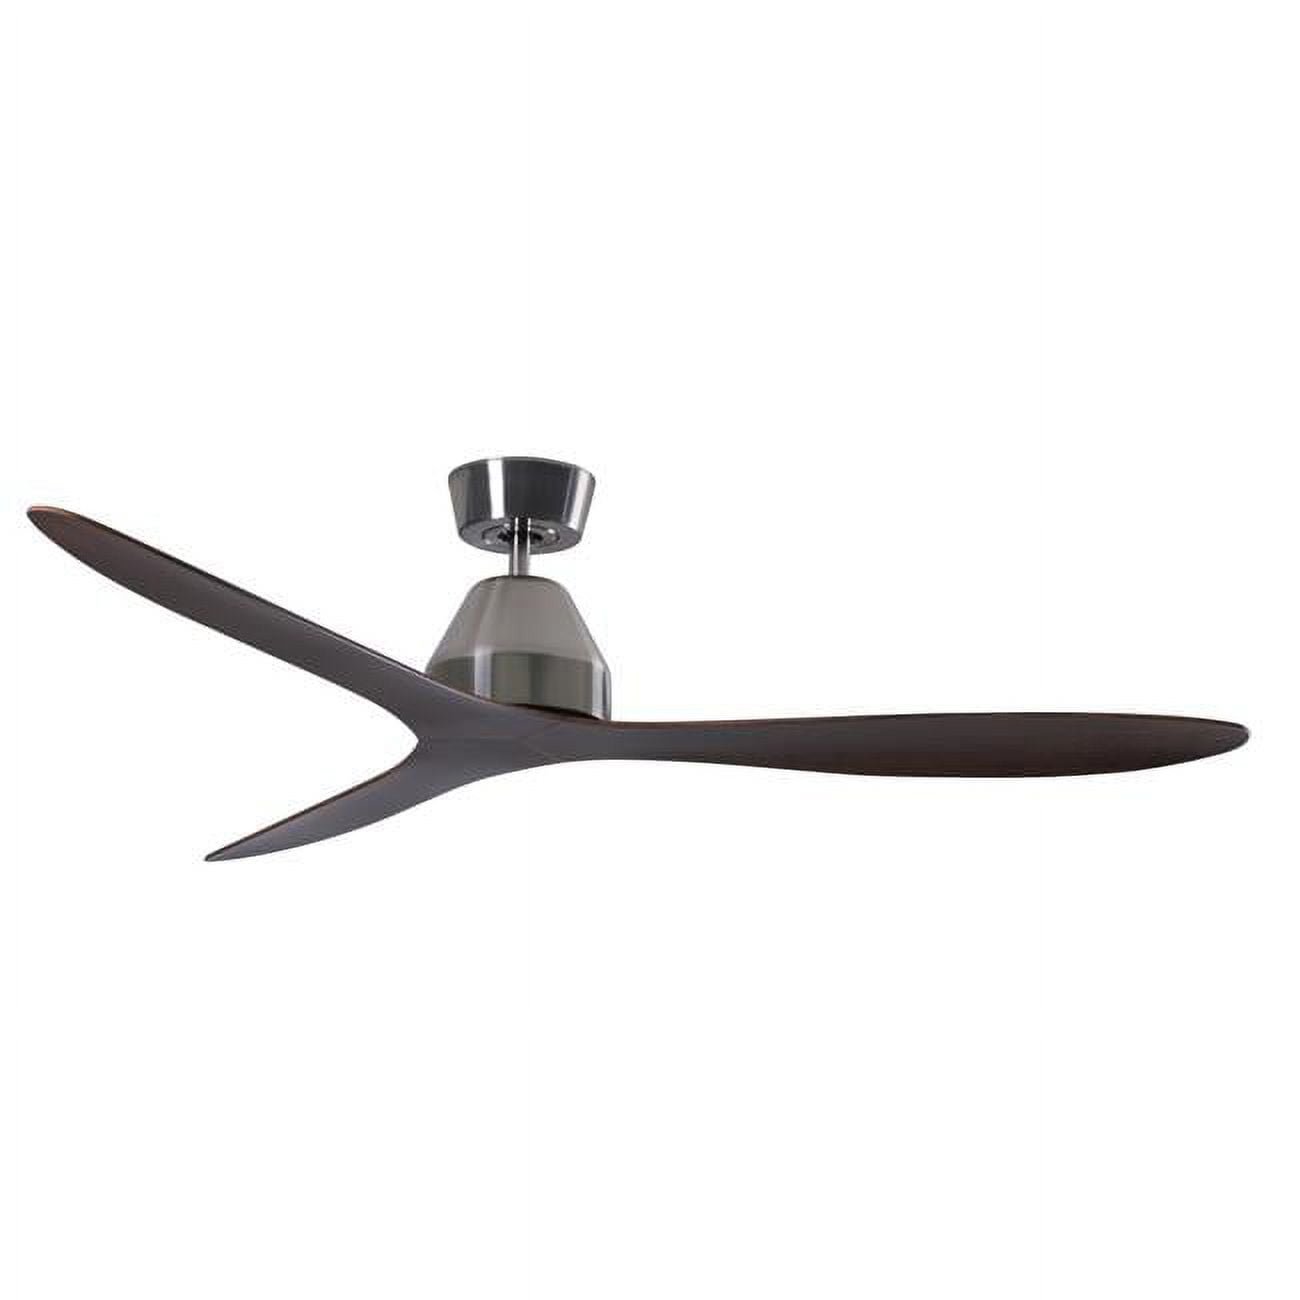 Picture of Lucci Air 21304201 Lucci Air Whitehaven 56-inch Brushed Chrome and Dark Koa Blades Ceiling Fan